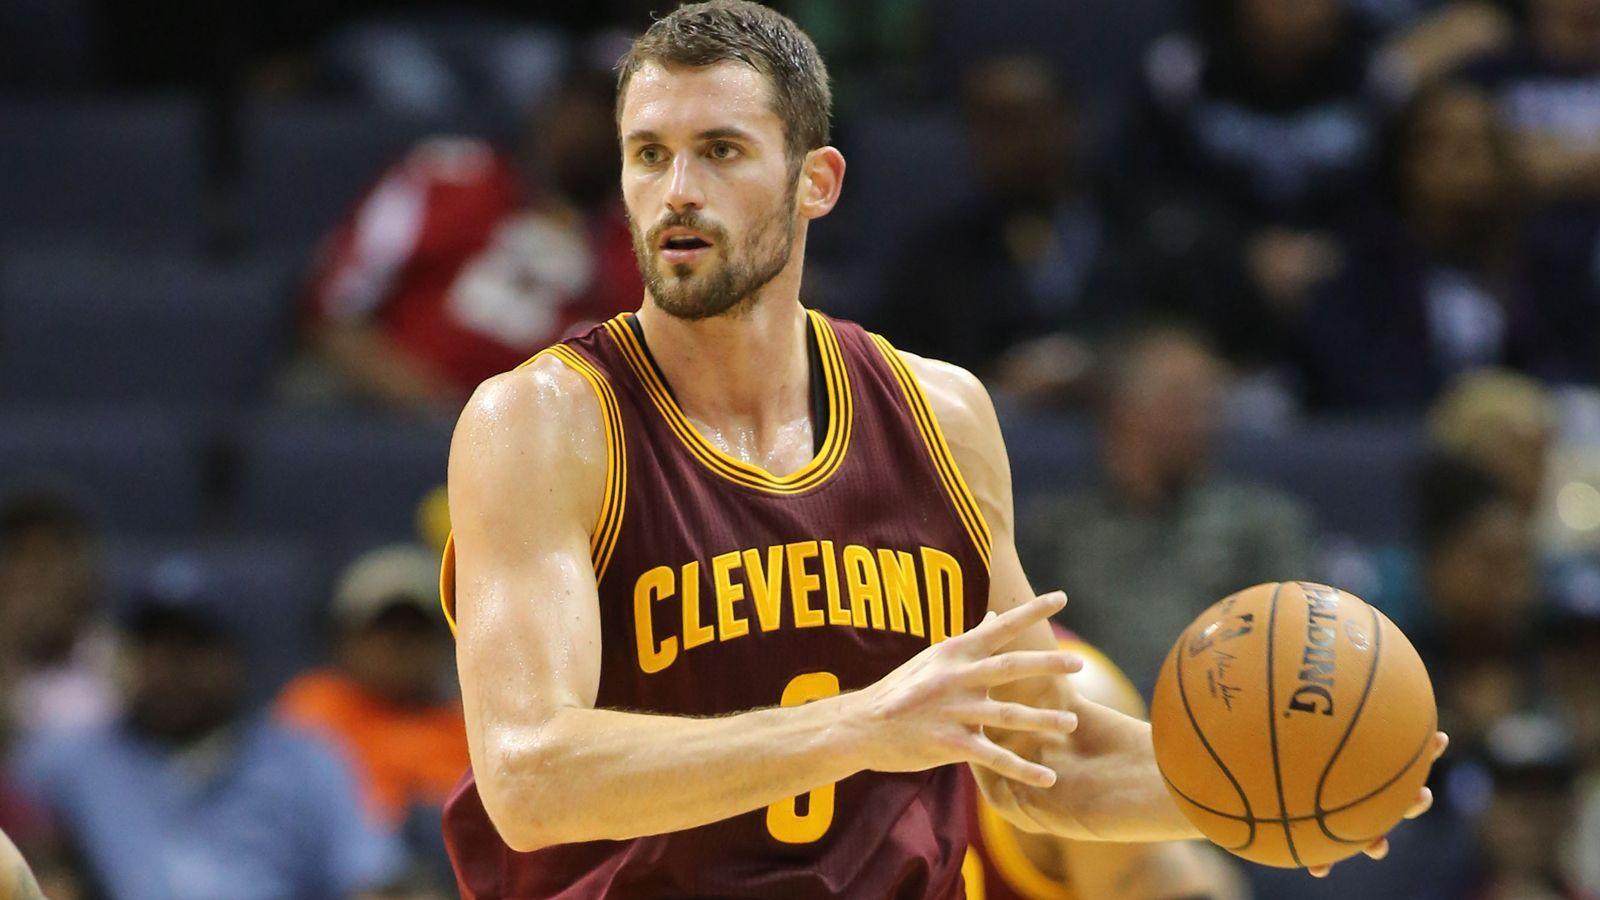 Kevin Love shoots down Lakers rumors, joint gesture claims in a